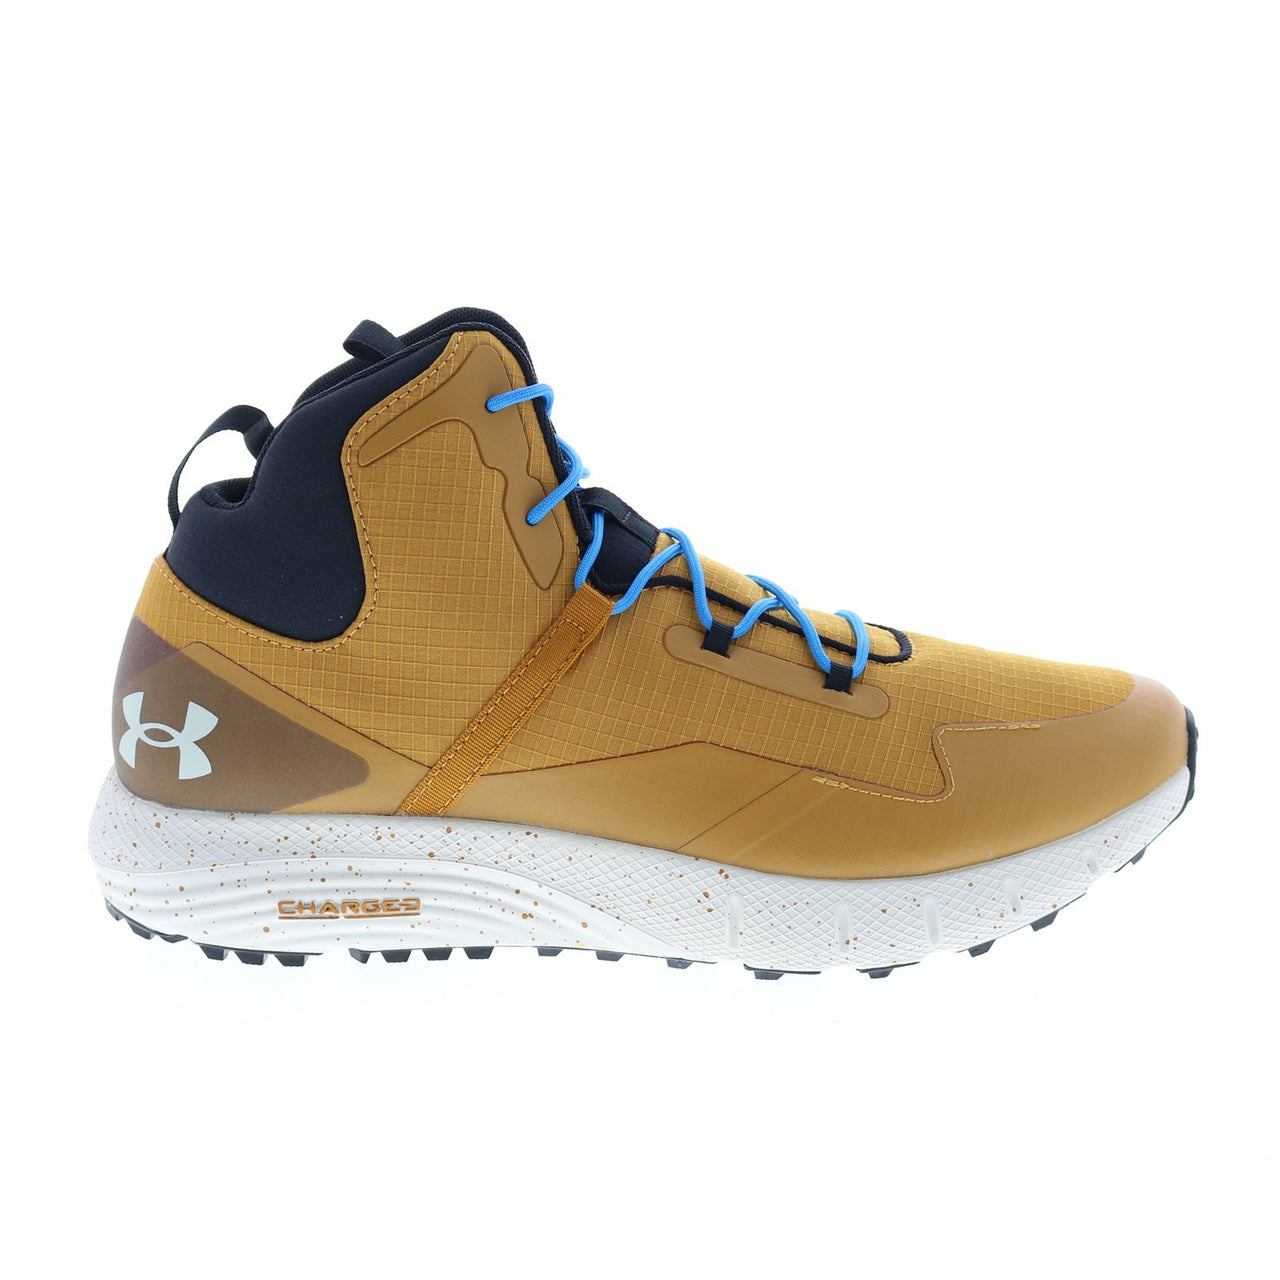 Under Armour Charged Bandit Trek Mens Yellow Canvas Athletic Hiking Sh ...